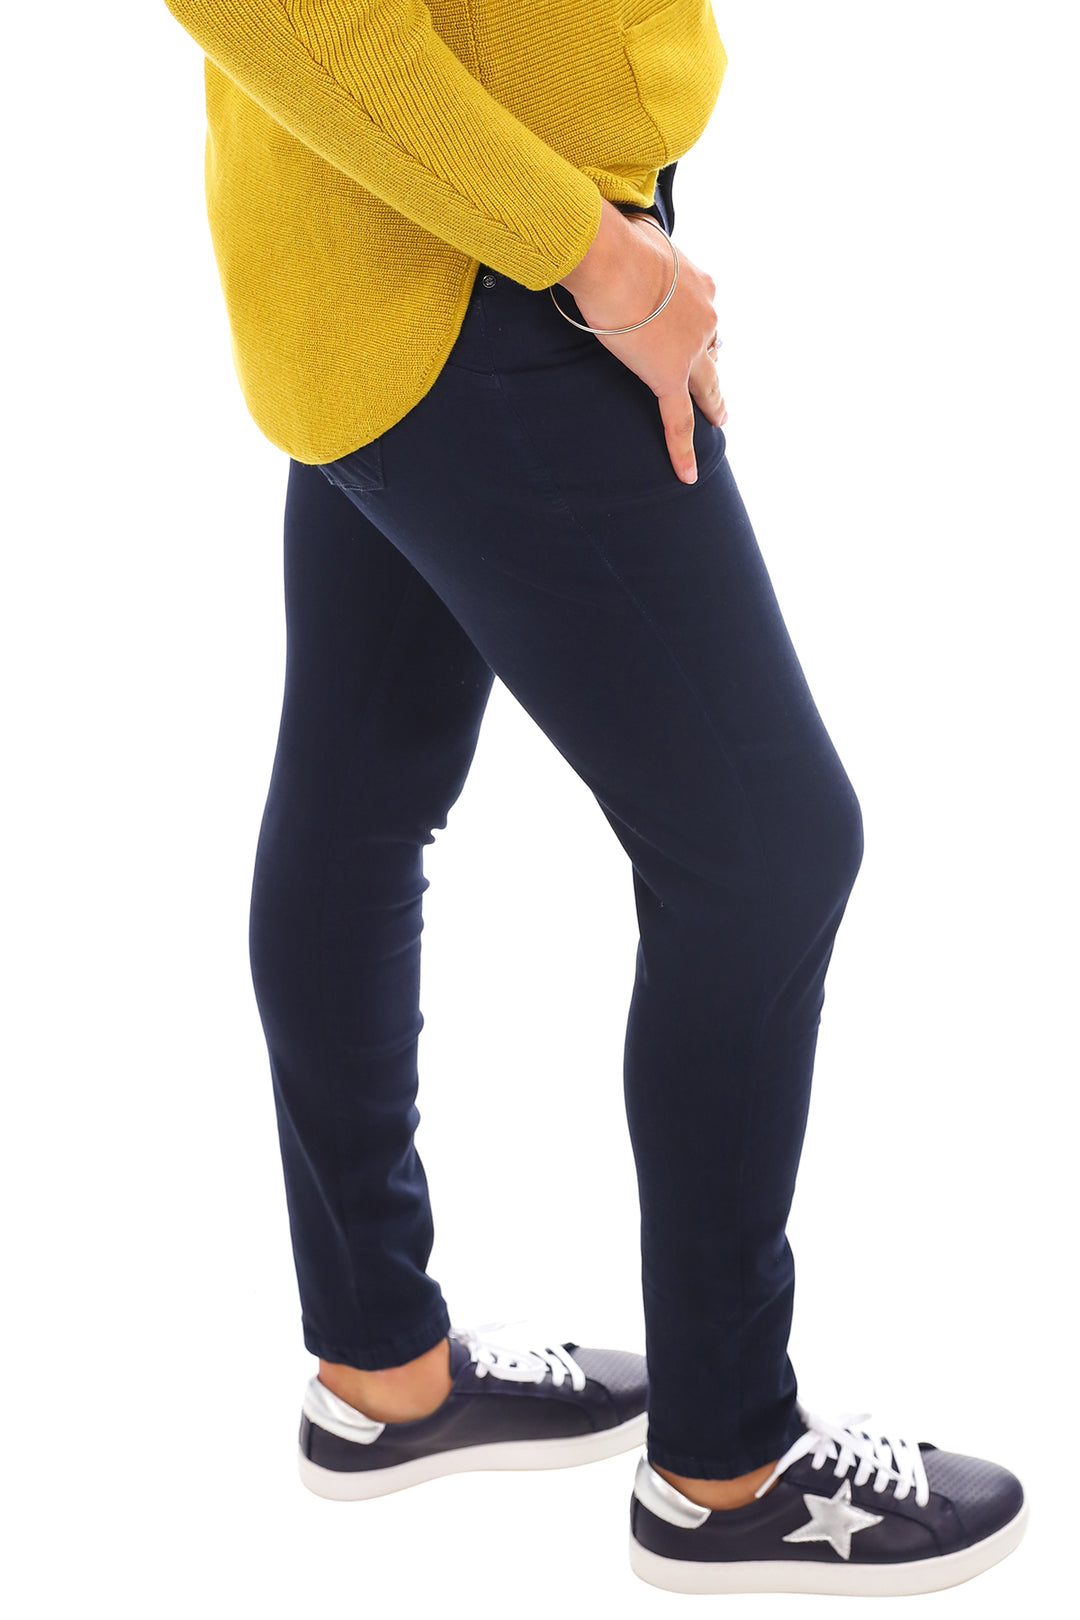 Ana and Lucy high rise jeans in navy, sold and shipped from Pizazz Boutique Nelson Bay women's dresses online Australia side view